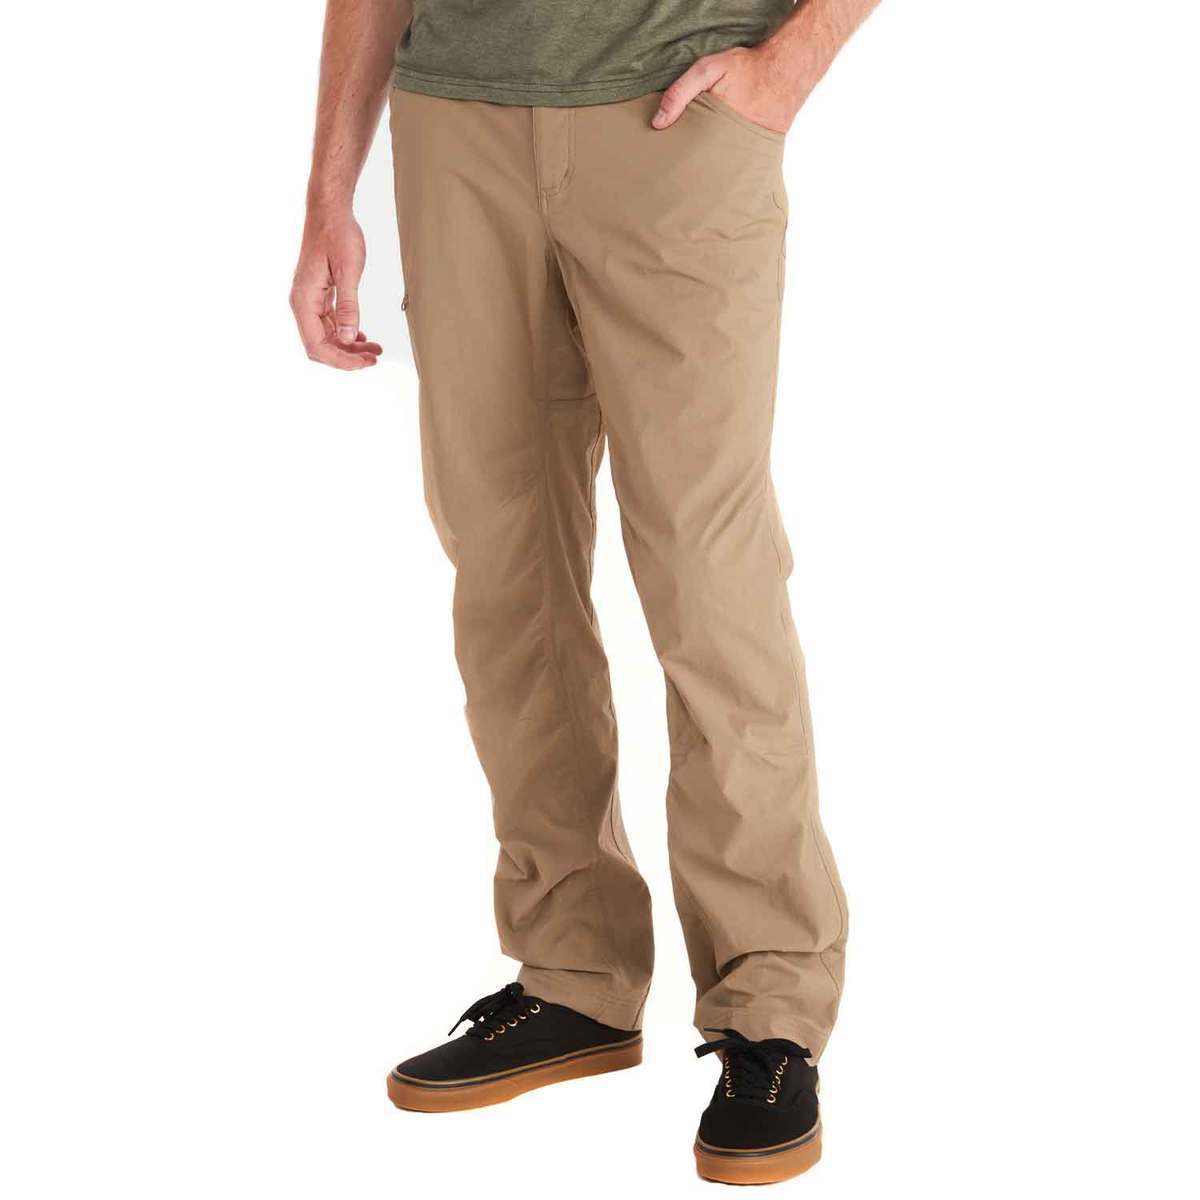 Marmot Men's Arch Rock Relaxed Fit Hiking Pants | Sportsman's Warehouse